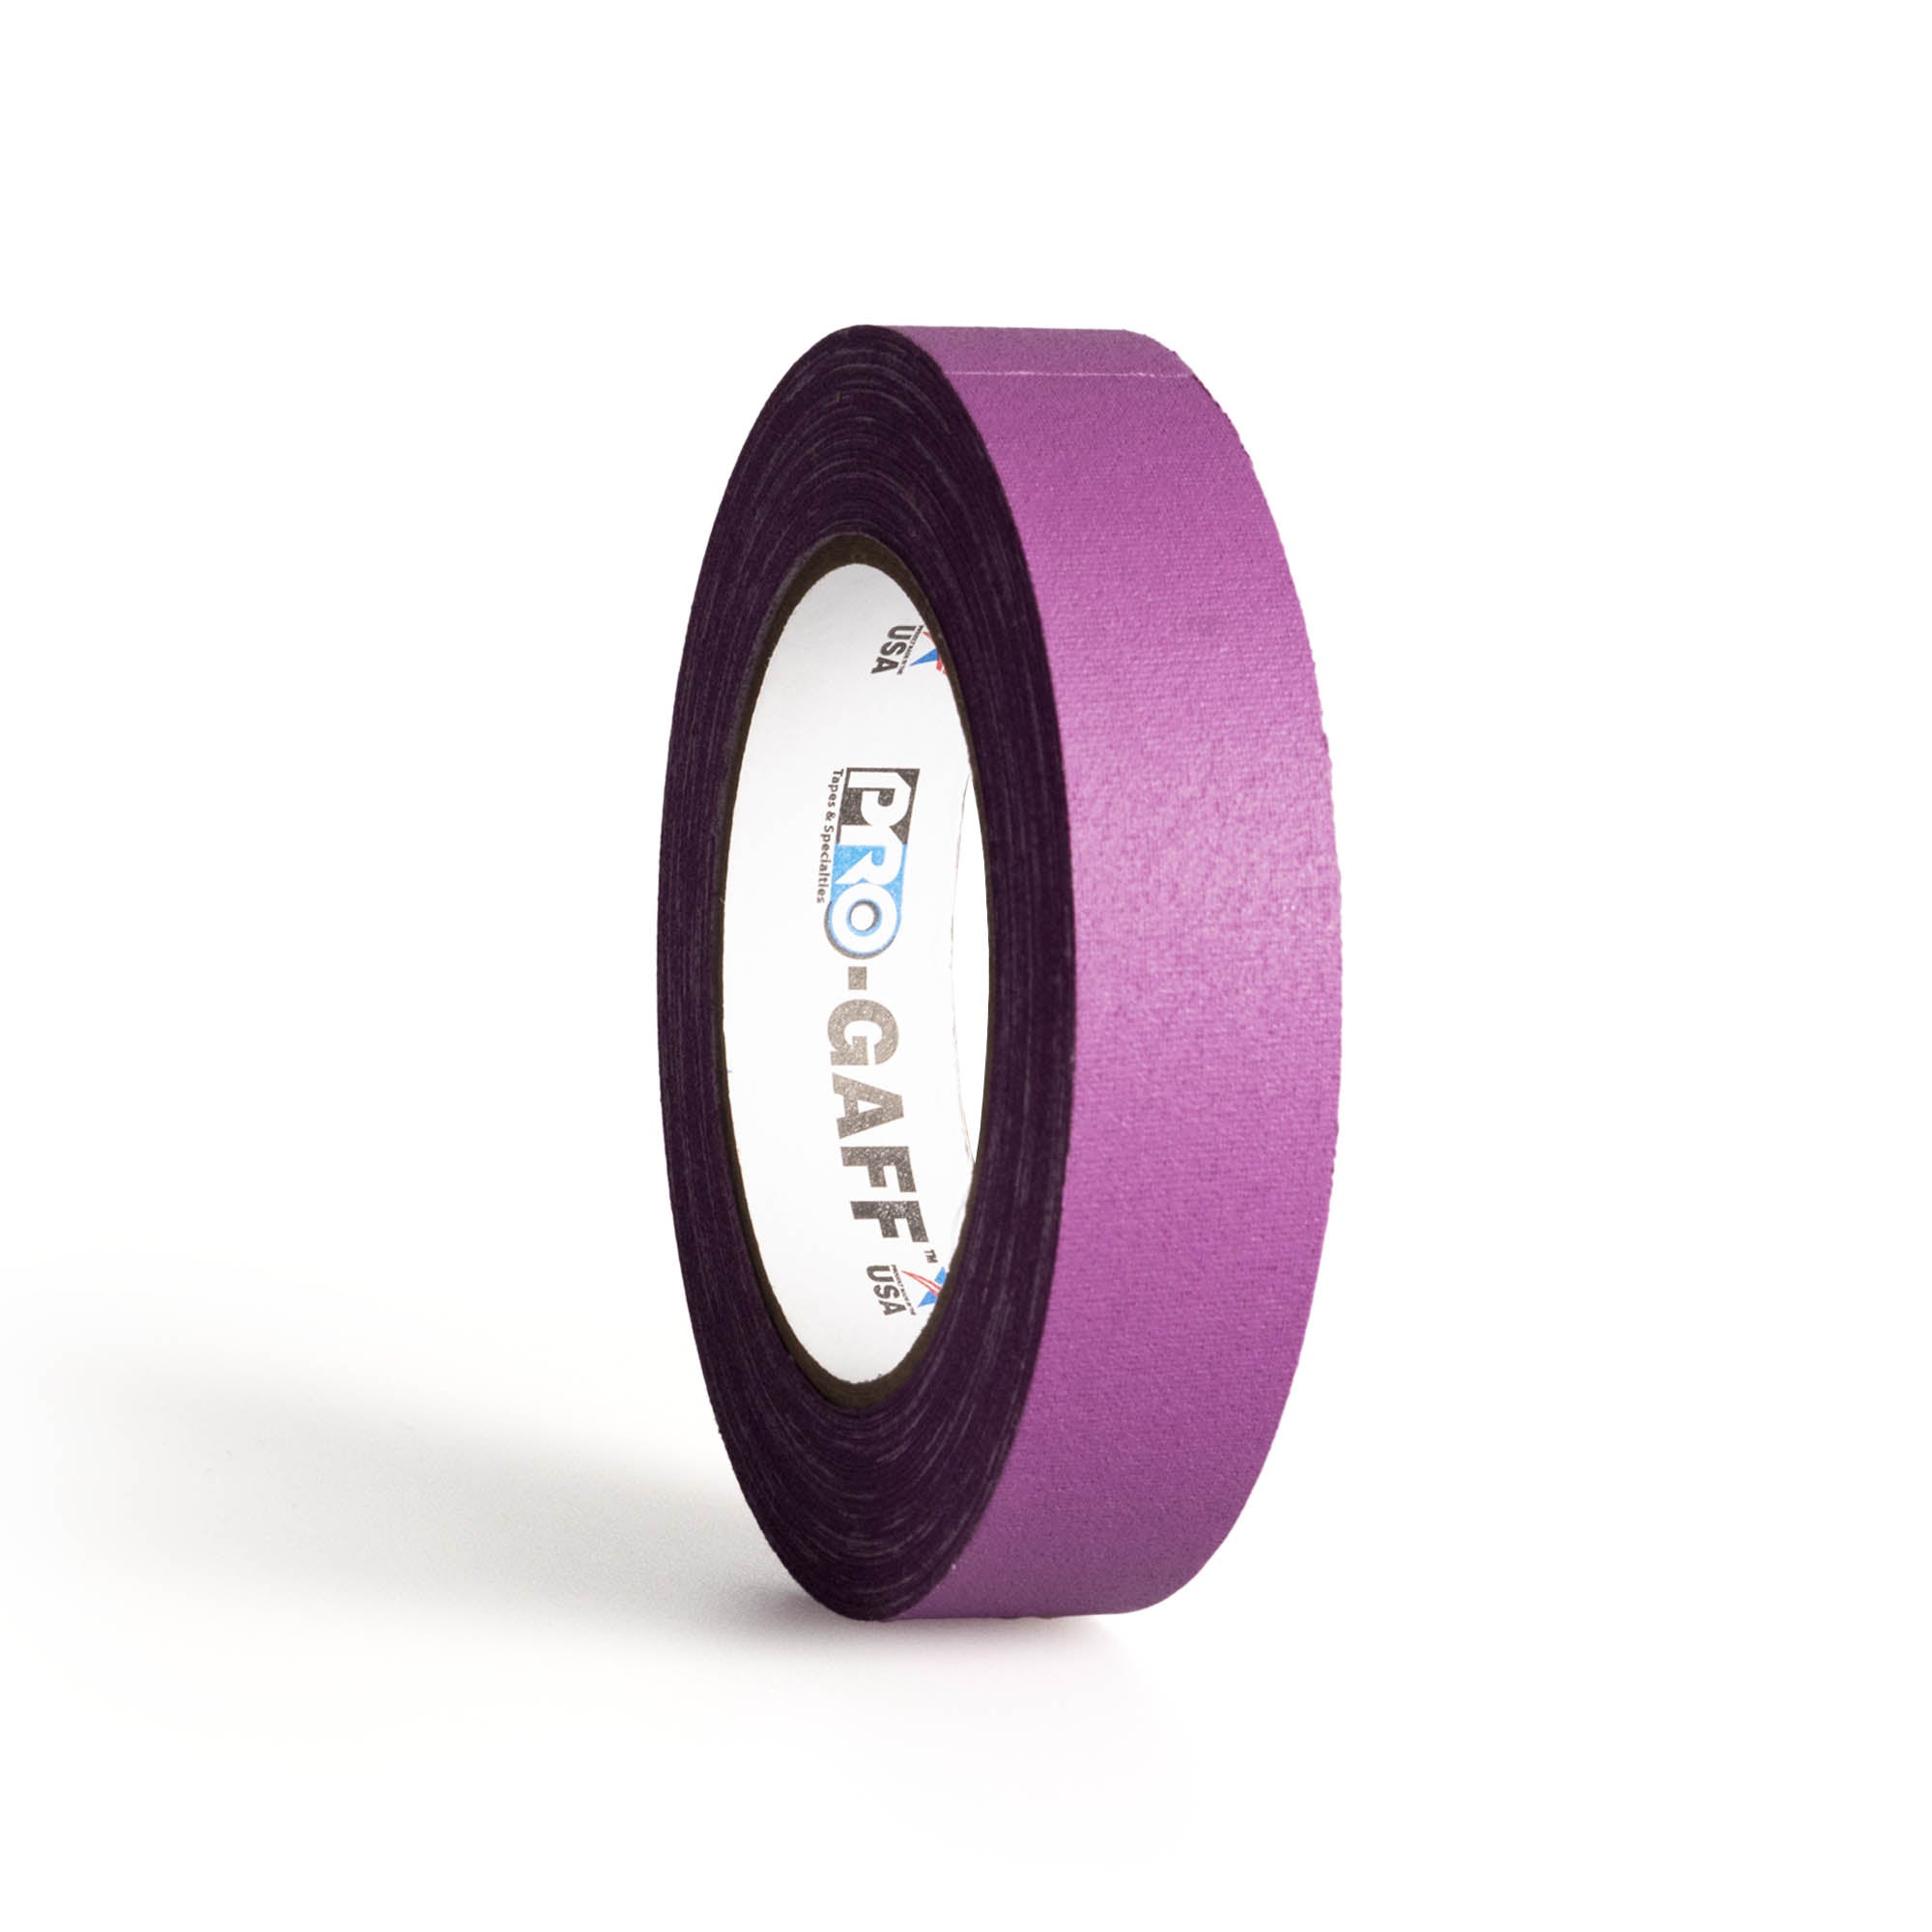 25m roll of pro gaff fabric adhesive tape in purple standing up